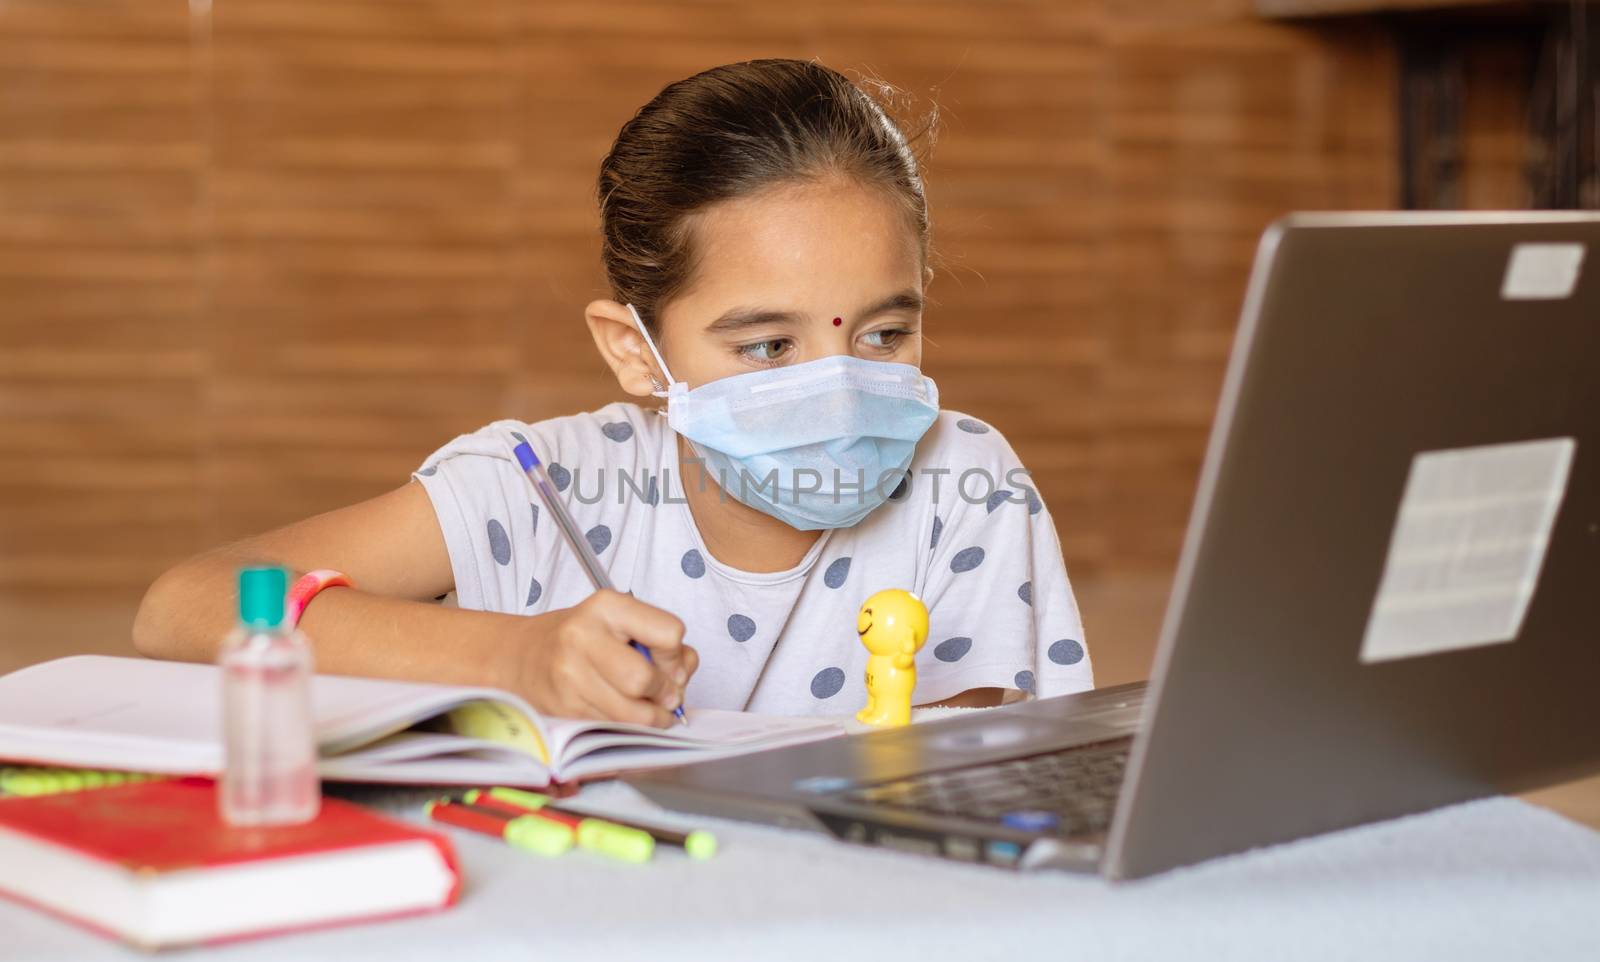 Concept of homeschooling and e-learning, young girl with medical mask writing by looking into laptop during covid-19 or coronavirus pandemic lock down. by lakshmiprasad.maski@gmai.com